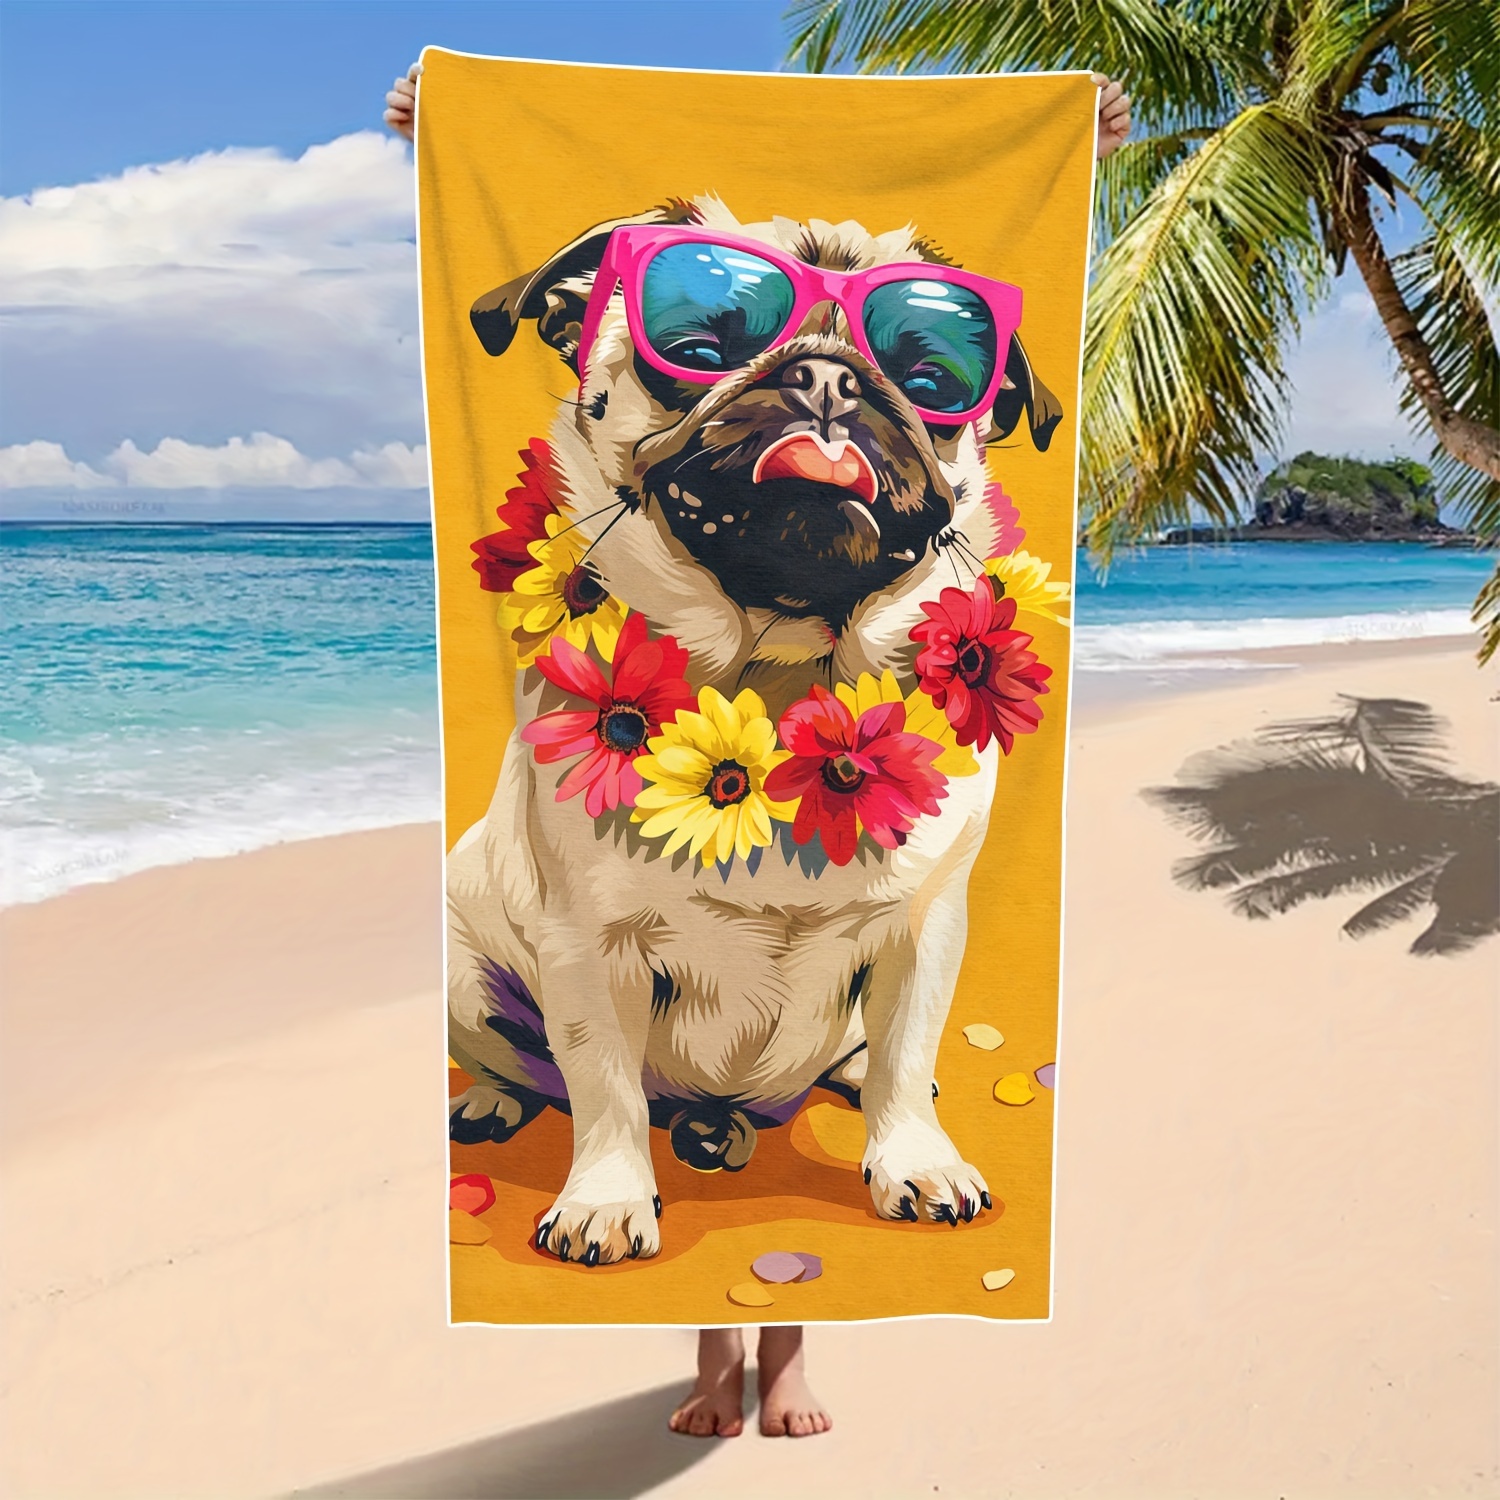 

1pc Cute Pug Dog Cartoon Microfiber Beach Towel - Quick Drying, Lightweight, Soft, Absorbent Travel Blanket For Swimming, Camping, Yoga - Machine Washable Outdoor Beach Essentials, 280gsm